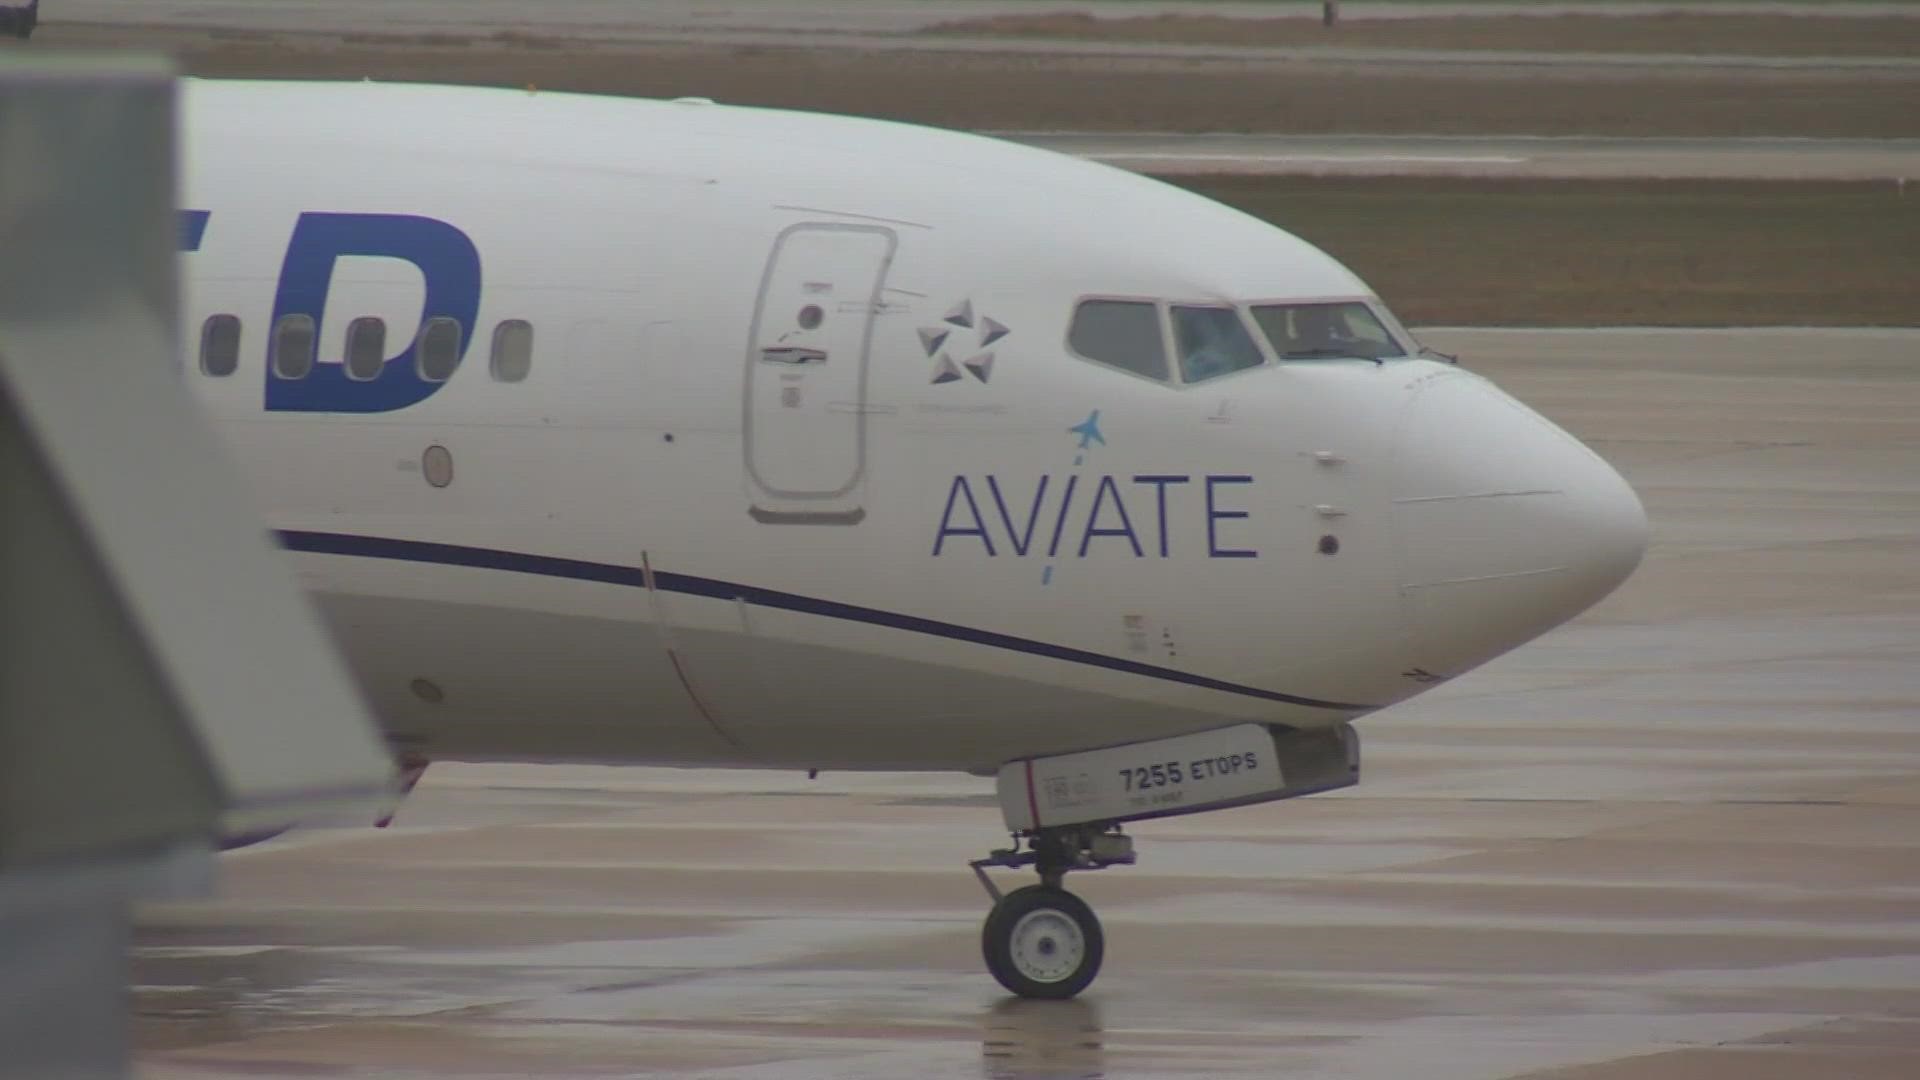 De-icing planes did not deter some airlines at the San Antonio Airport from canceling flights due to Winter Storm Mara.